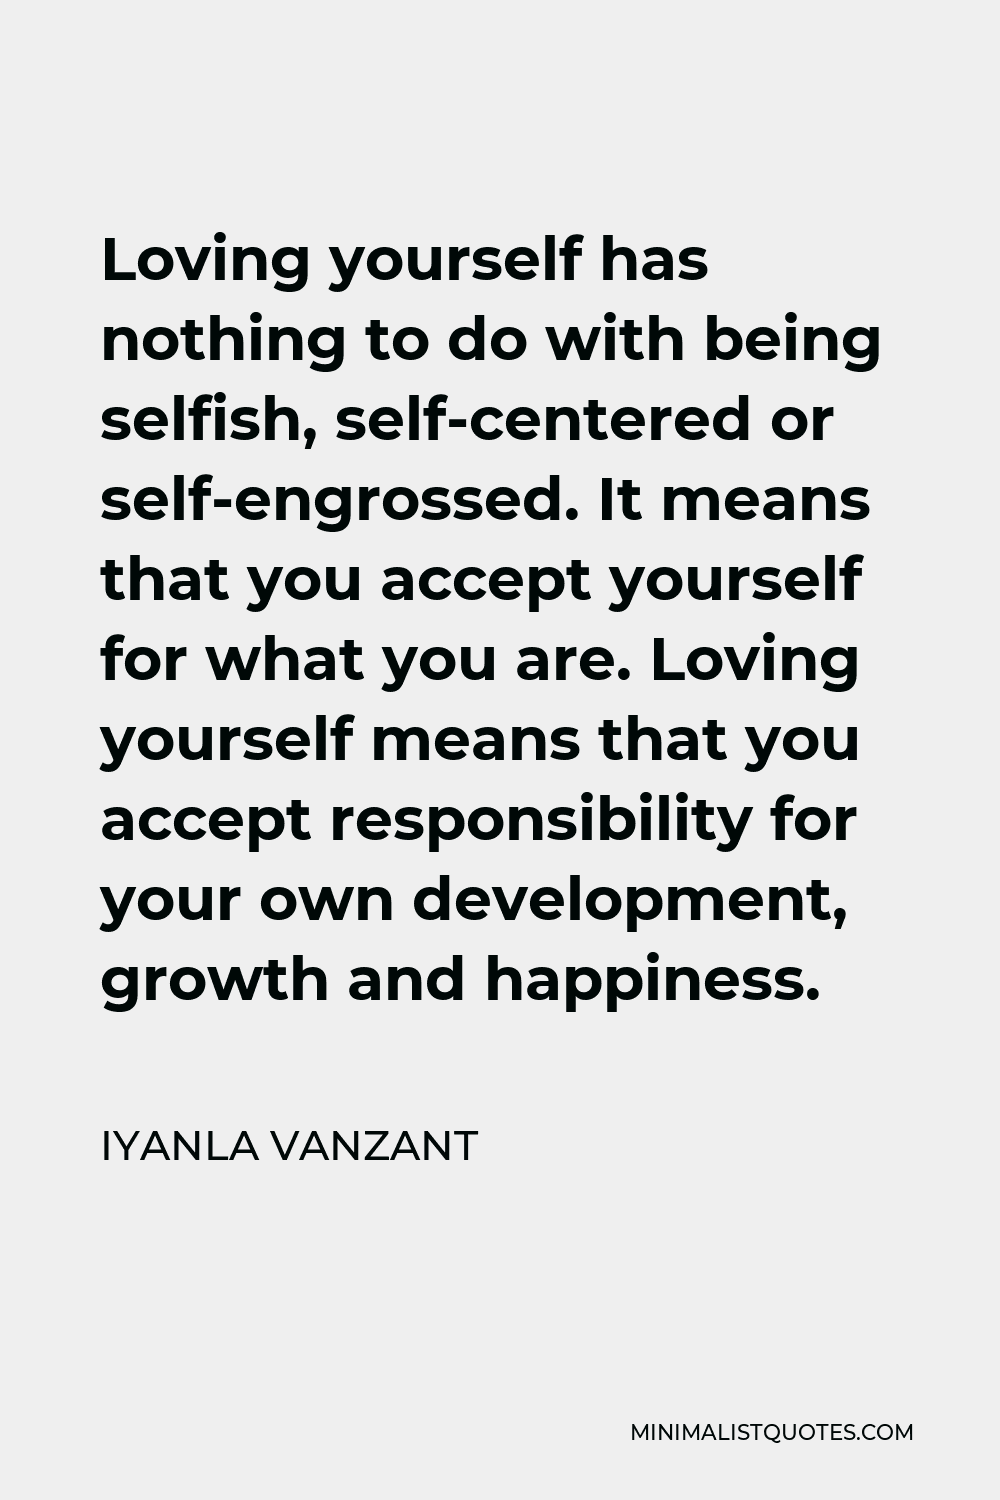 Iyanla Vanzant Quote - Loving yourself has nothing to do with being selfish, self-centered or self-engrossed. It means that you accept yourself for what you are. Loving yourself means that you accept responsibility for your own development, growth and happiness.